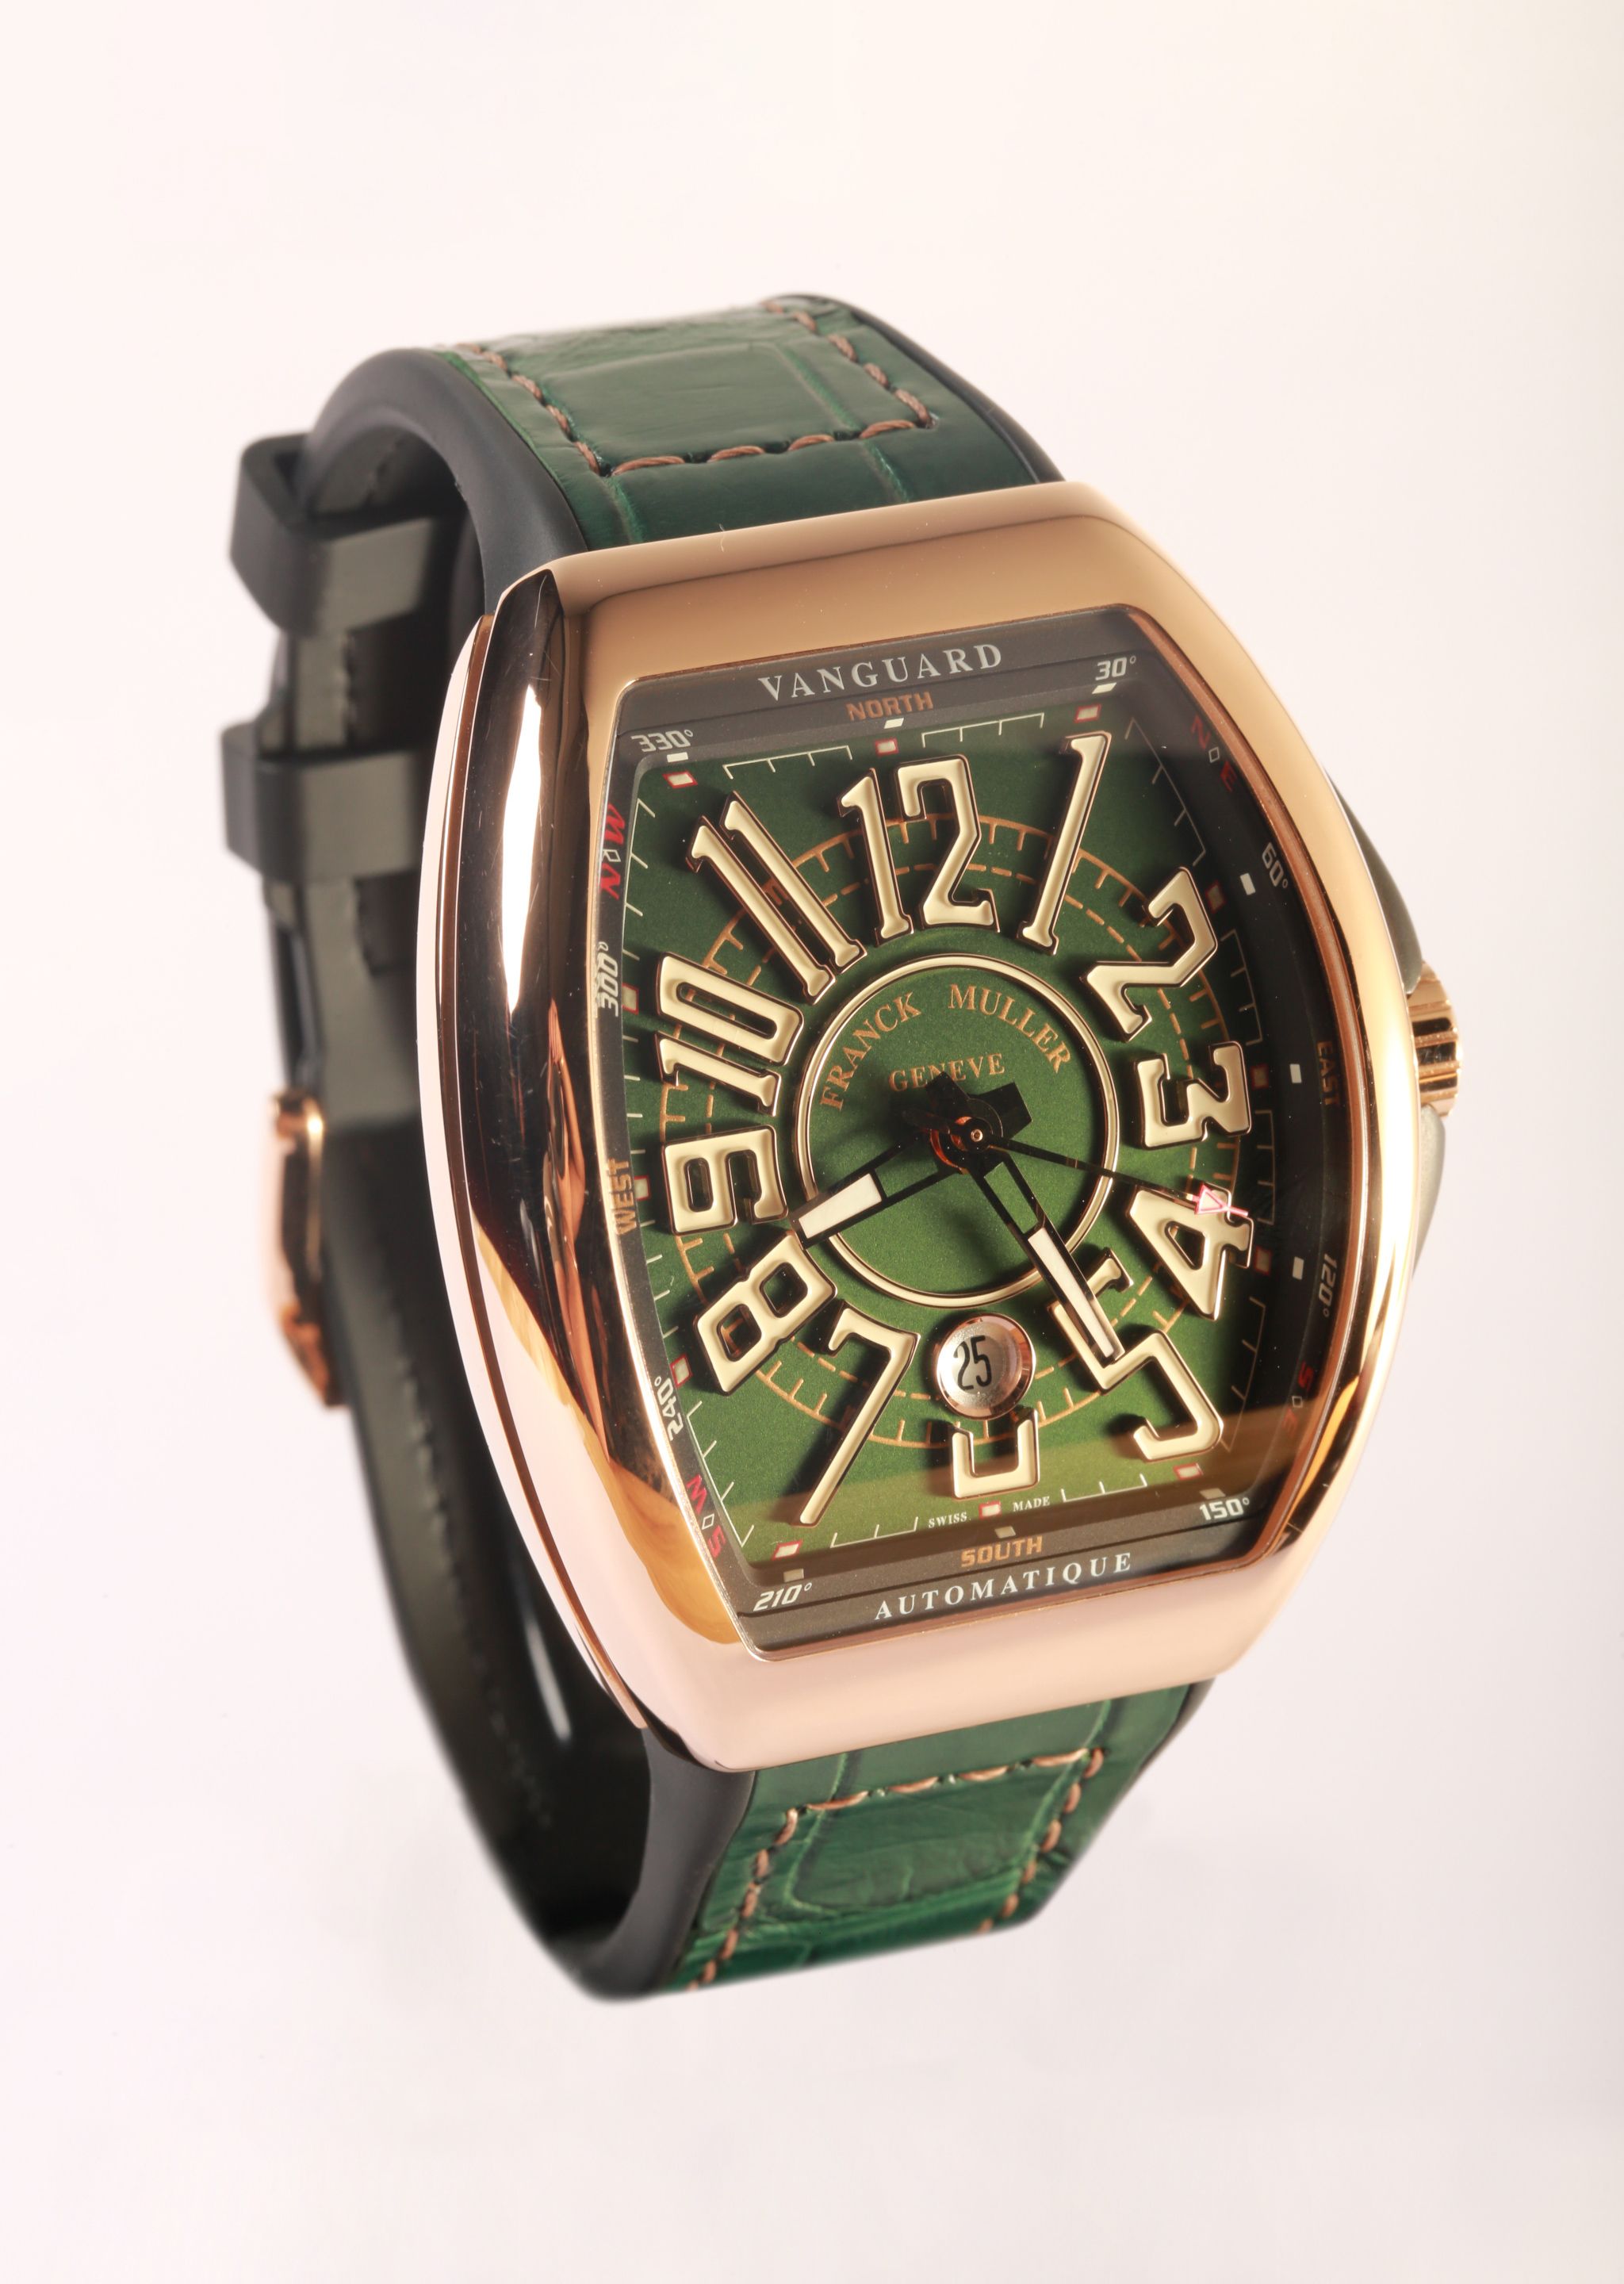 franck_muller_india_limited_edition_watch_1664780042633a870a235b3.jpg